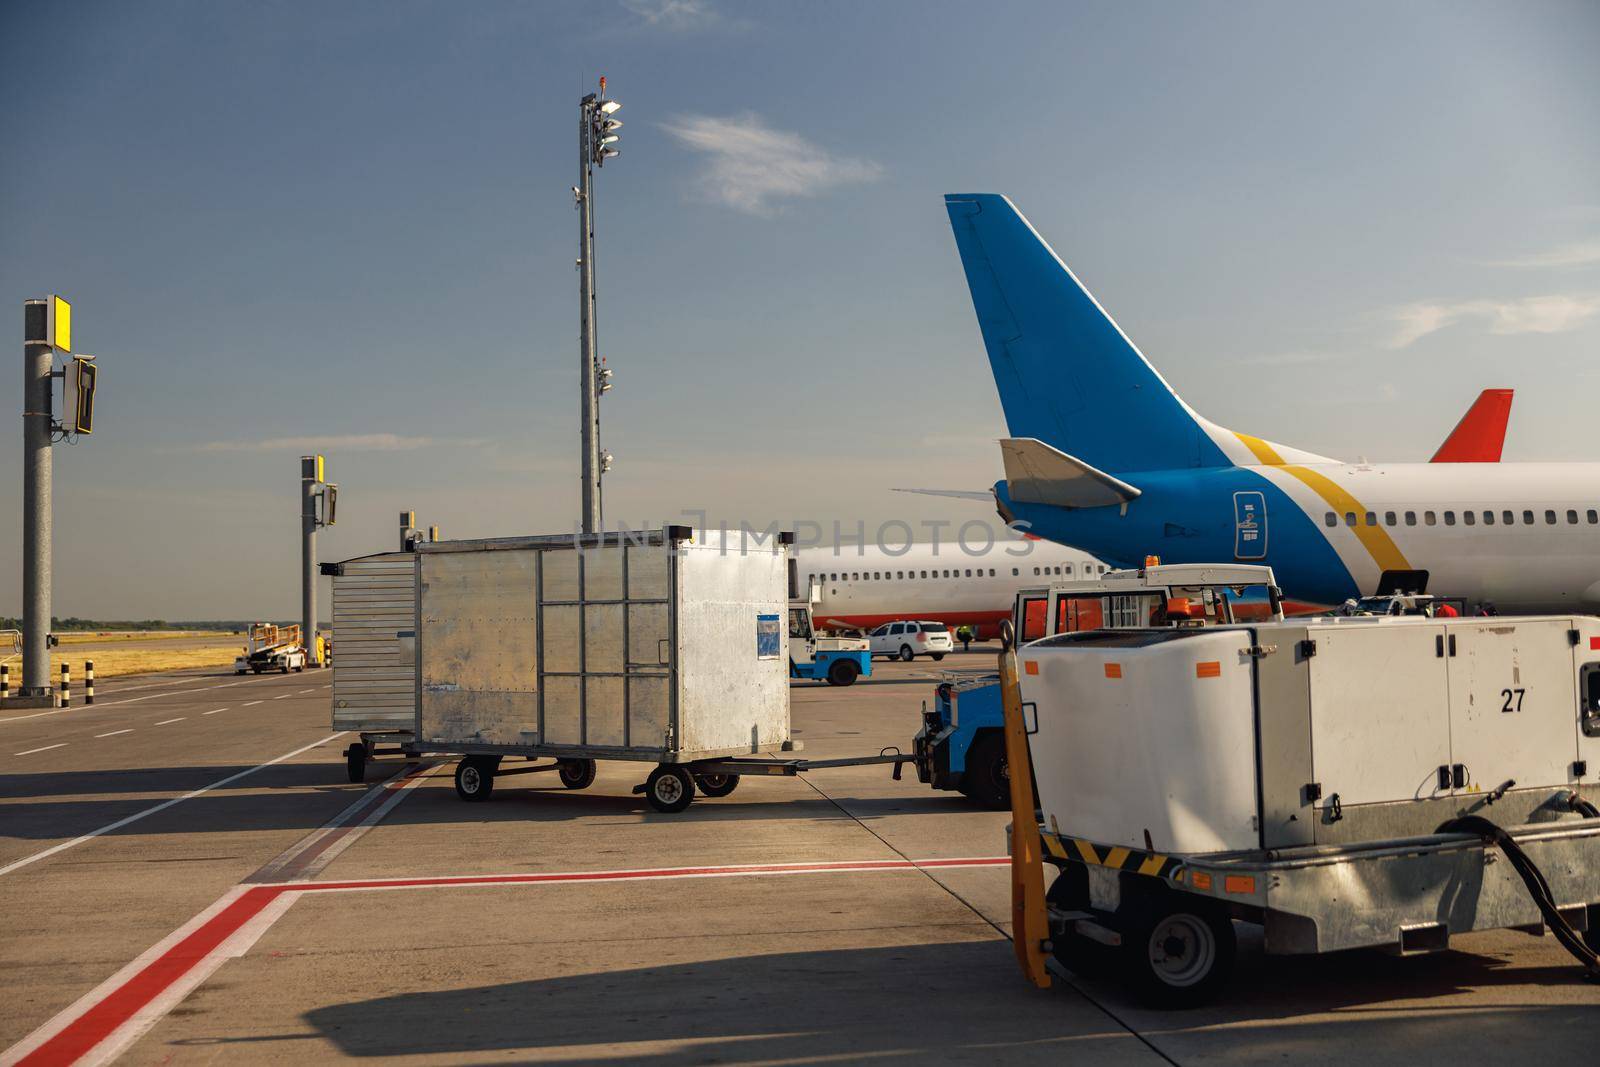 Airfield tractors near big modern airplane. Preparation of aircraft for boarding in airport hub on a daytime. Plane, shipping, transportation concept